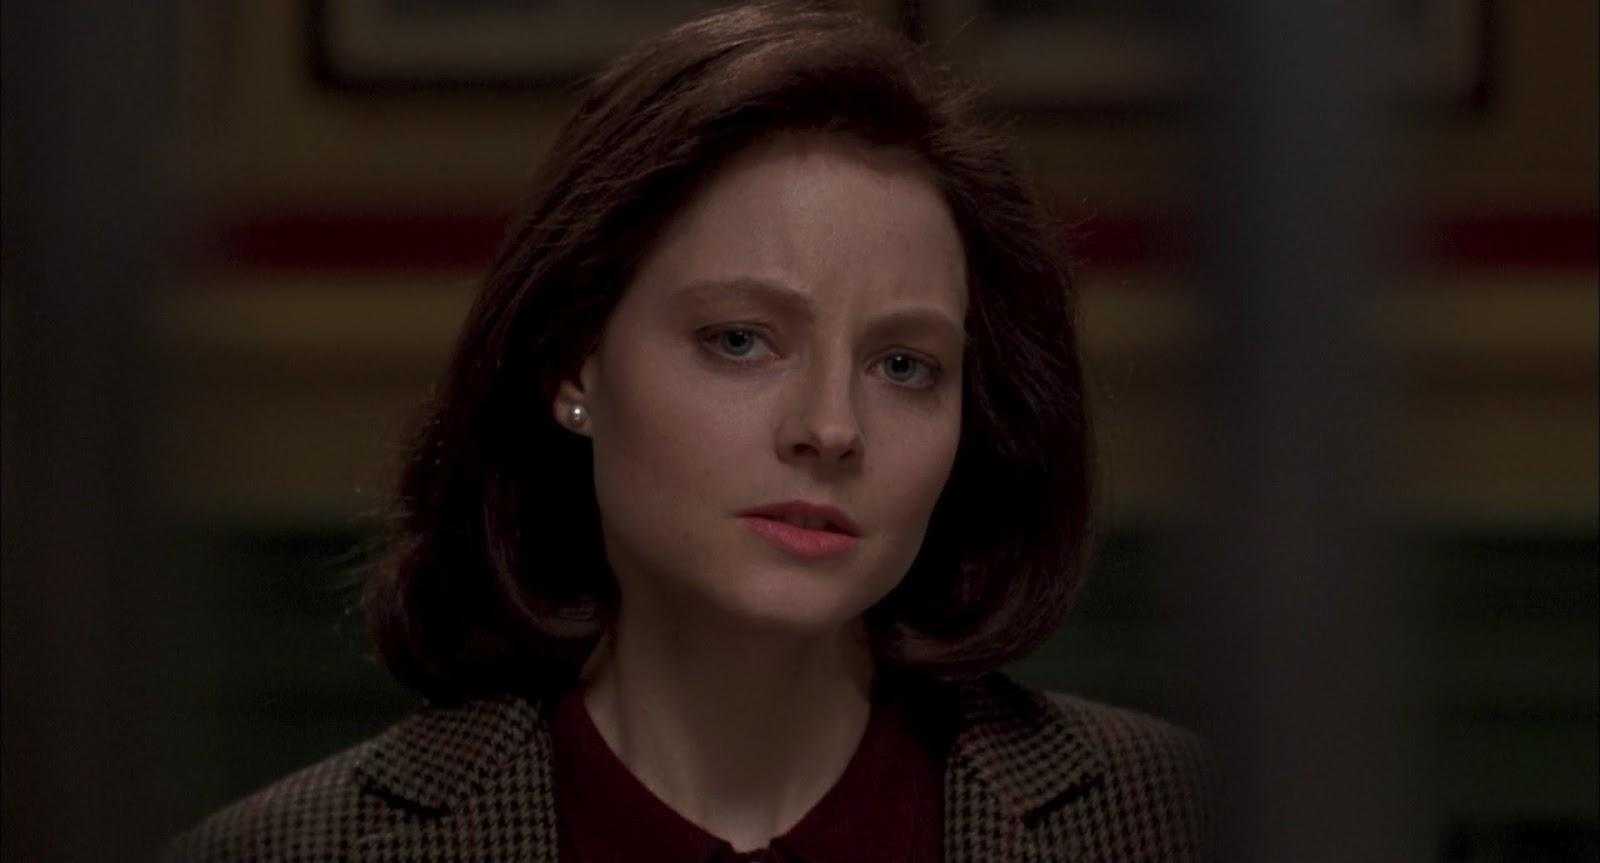 Silence of the Lambs - Jodie Foster